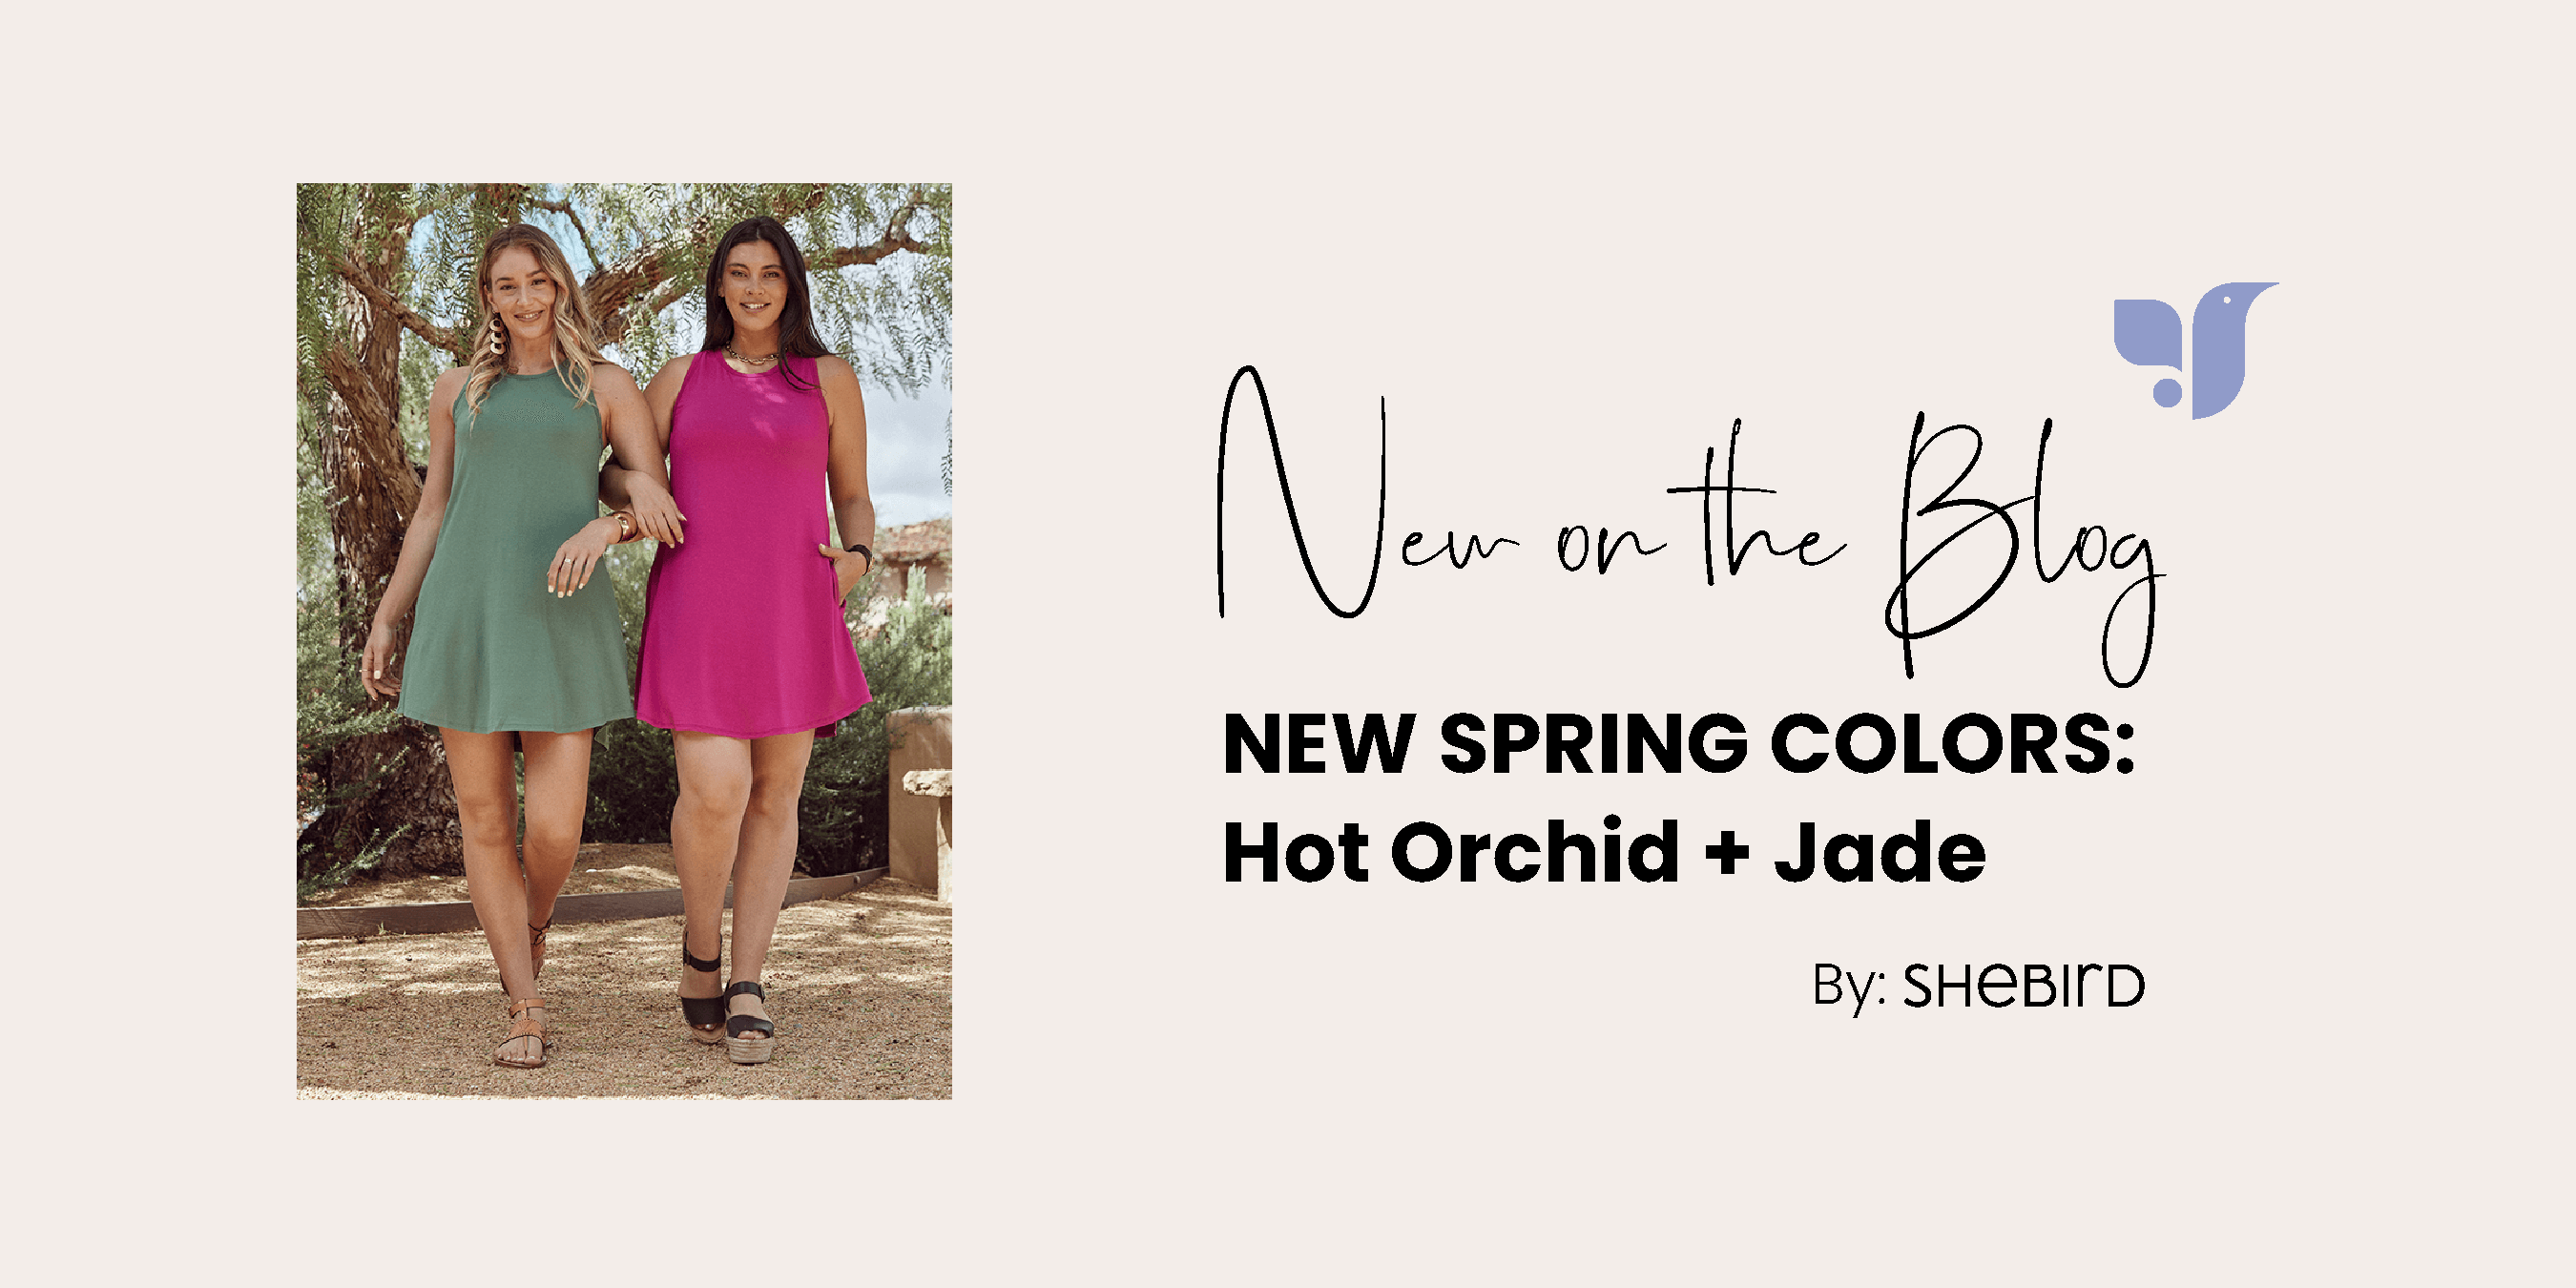 Shebird: NEW on the BLOG: NEW spring colors